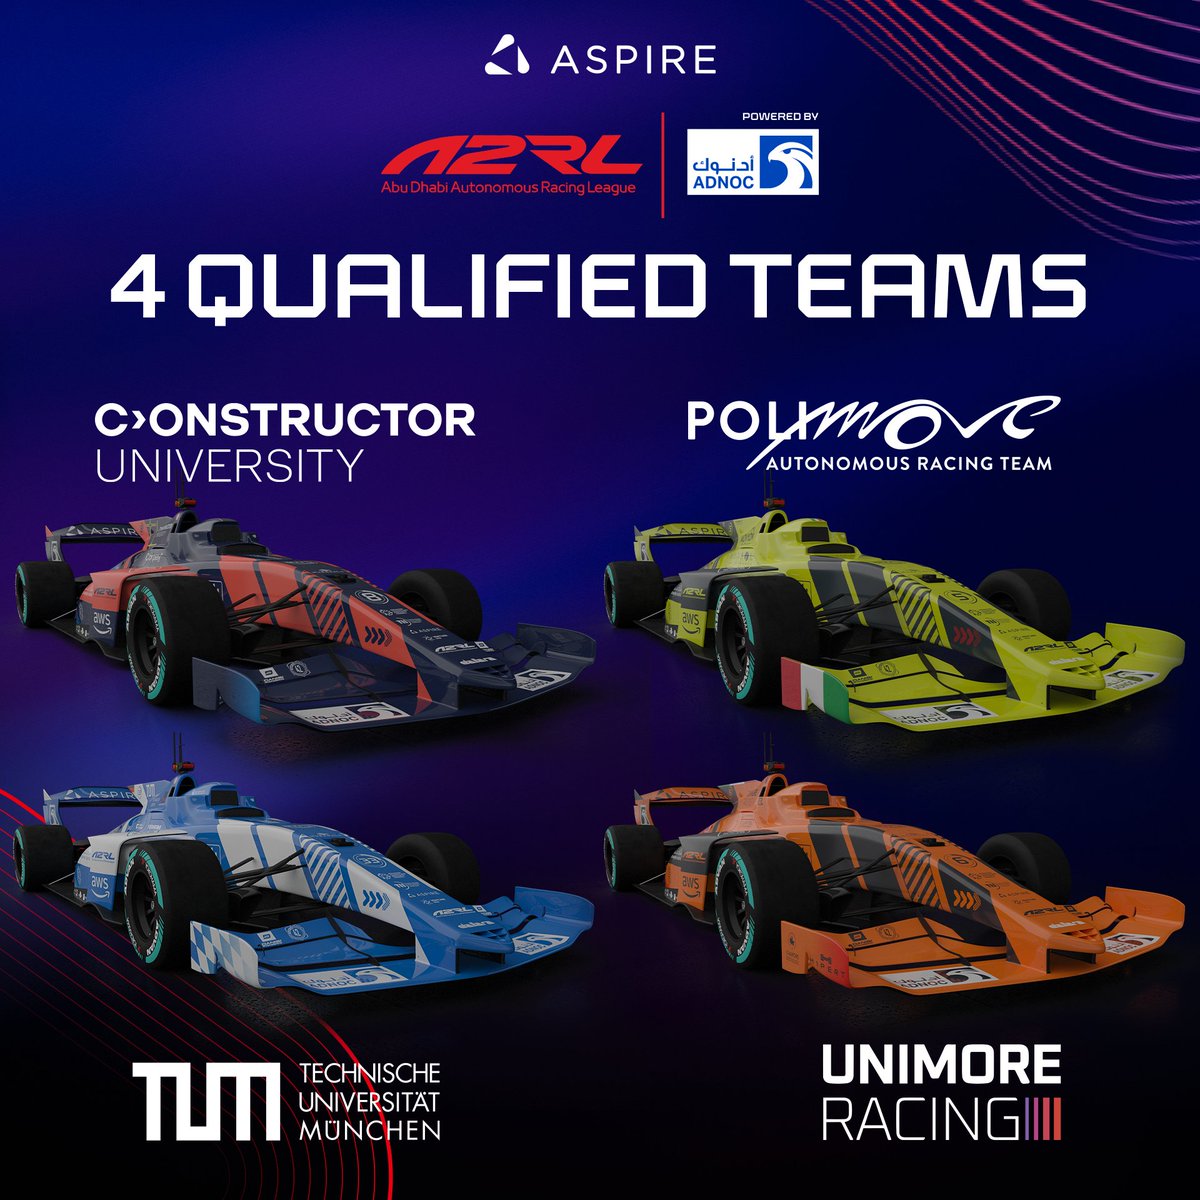 The stage is set for A2RL's final race! After an intense qualifying session, here's the lineup for tonight: Polimove 🇮🇹 in P1, followed by TUM 🇩🇪, Unimore 🇮🇹, and Constructor Group 🇩🇪. Who will be the champion of the world’s largest extreme autonomous race? 📺 Watch the live